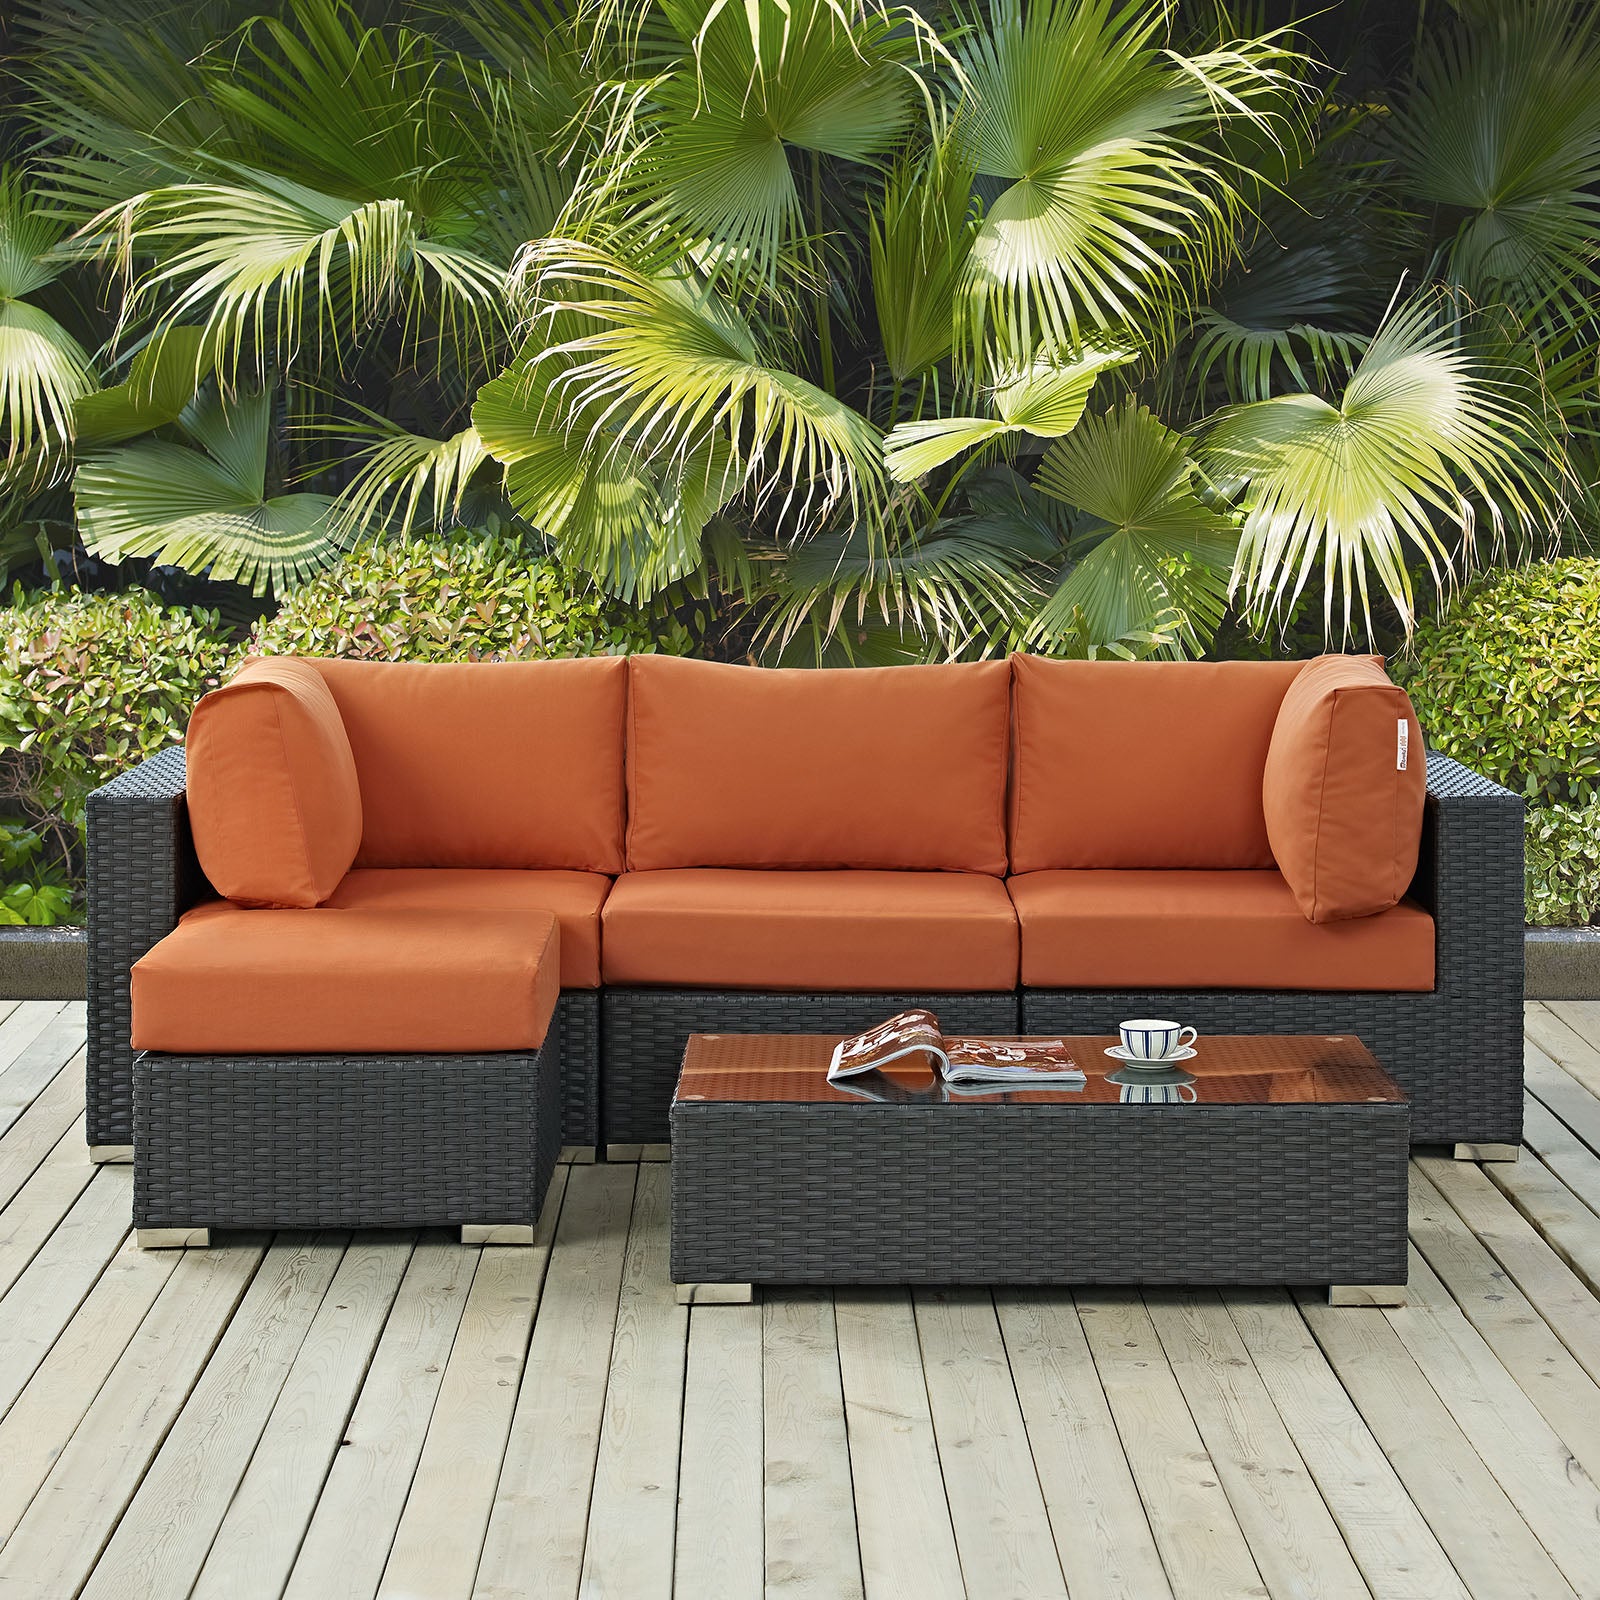 Modway Outdoor Conversation Sets - Sojourn 5 Piece Outdoor Patio Sunbrella Sectional Set Canvas Tuscan